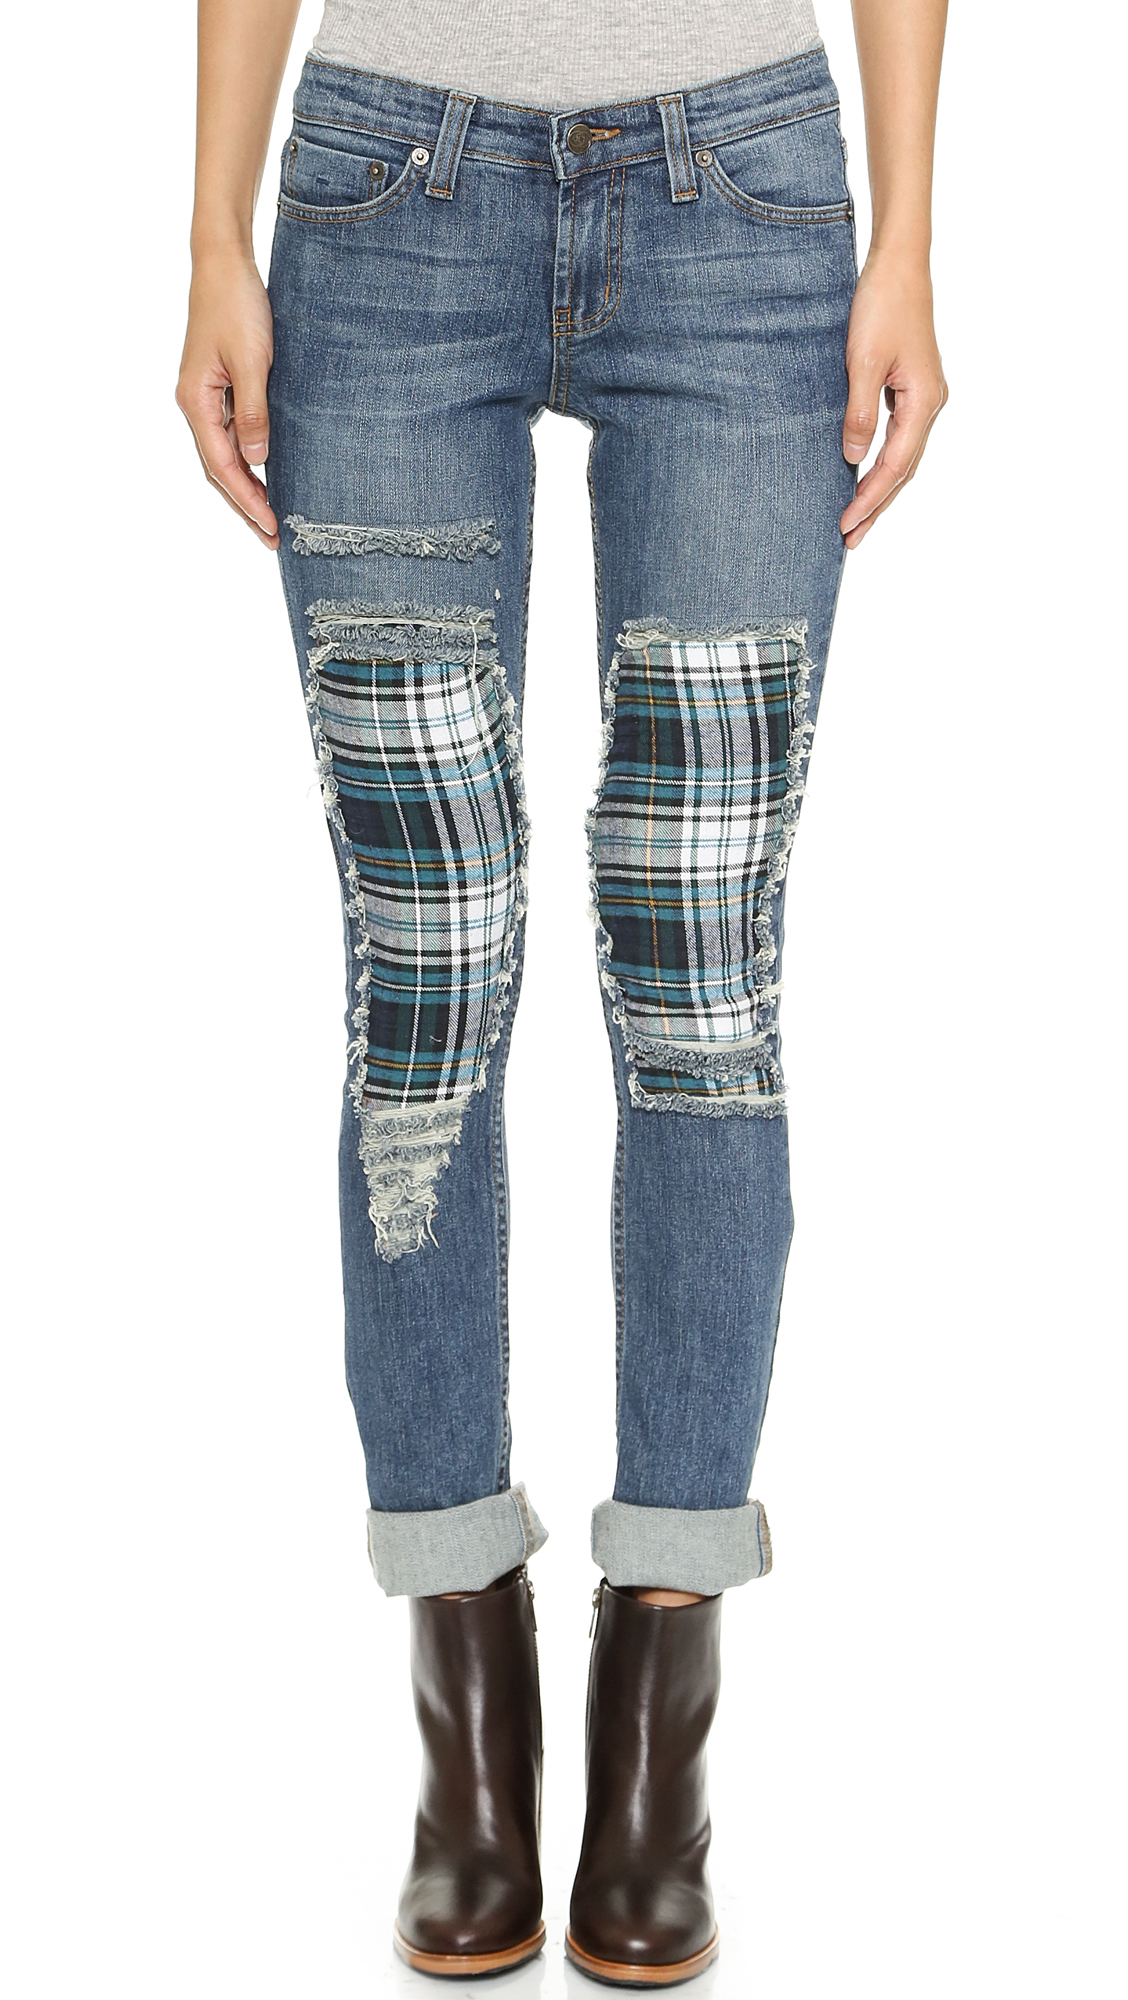 One by jet by john eshaya Plaid Skinny Jeans - Red Plaid in Blue (Blue ...